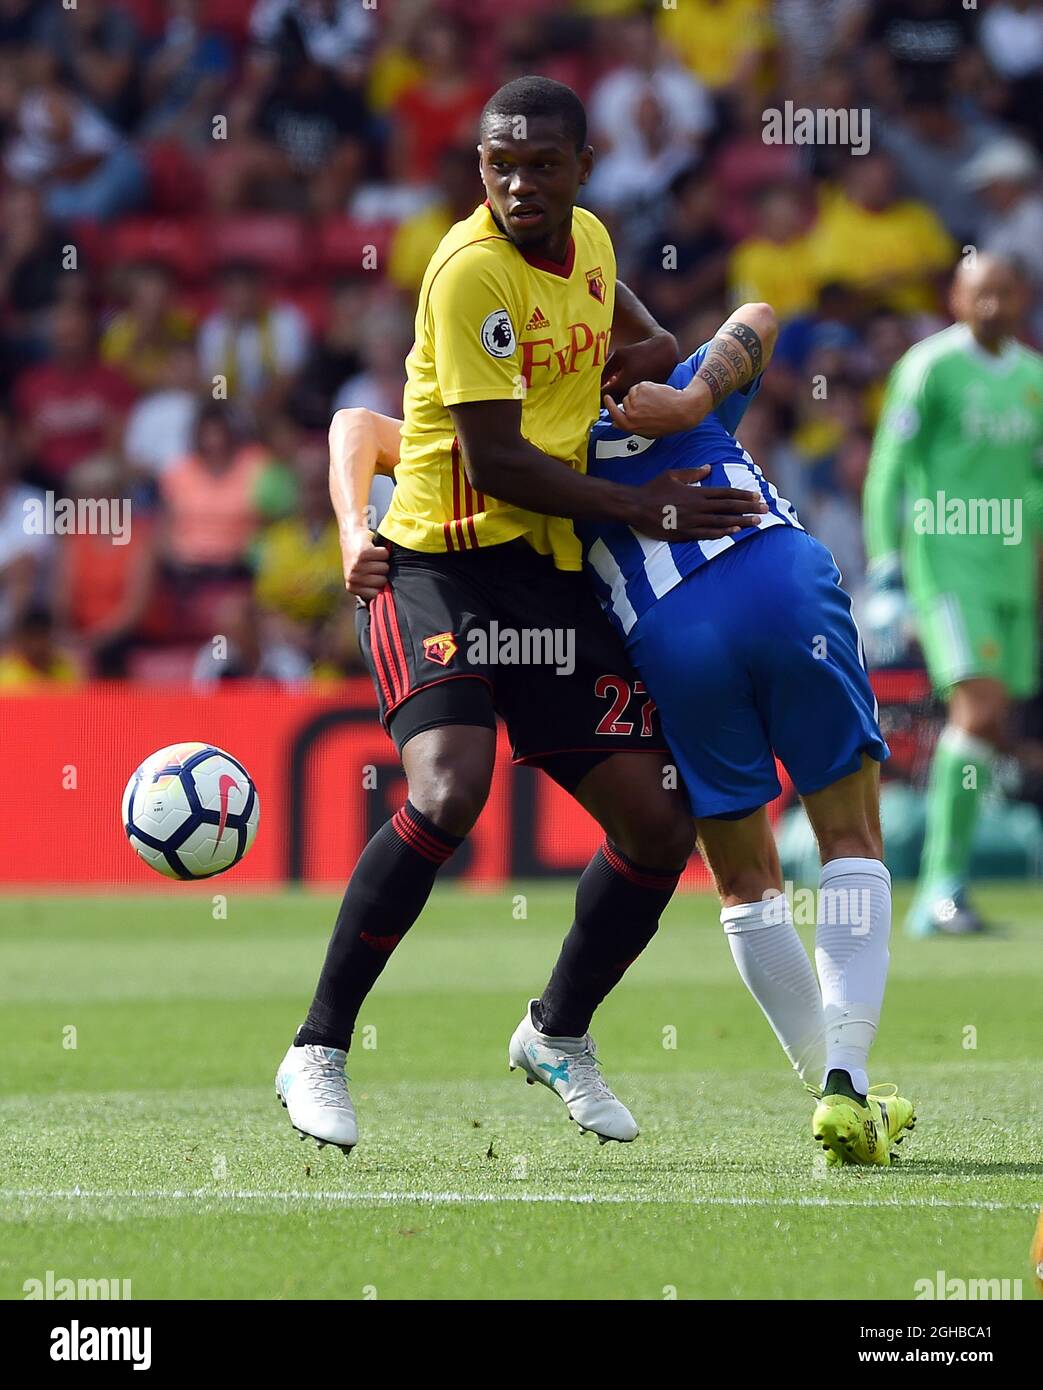 Christian Kabasele of Watford is challenged Pascal Grob of Brighton & Hove  Albion by during the premier league match at the Vicarage Road Stadium,  Watford. Picture date 26th August 2017. Picture credit